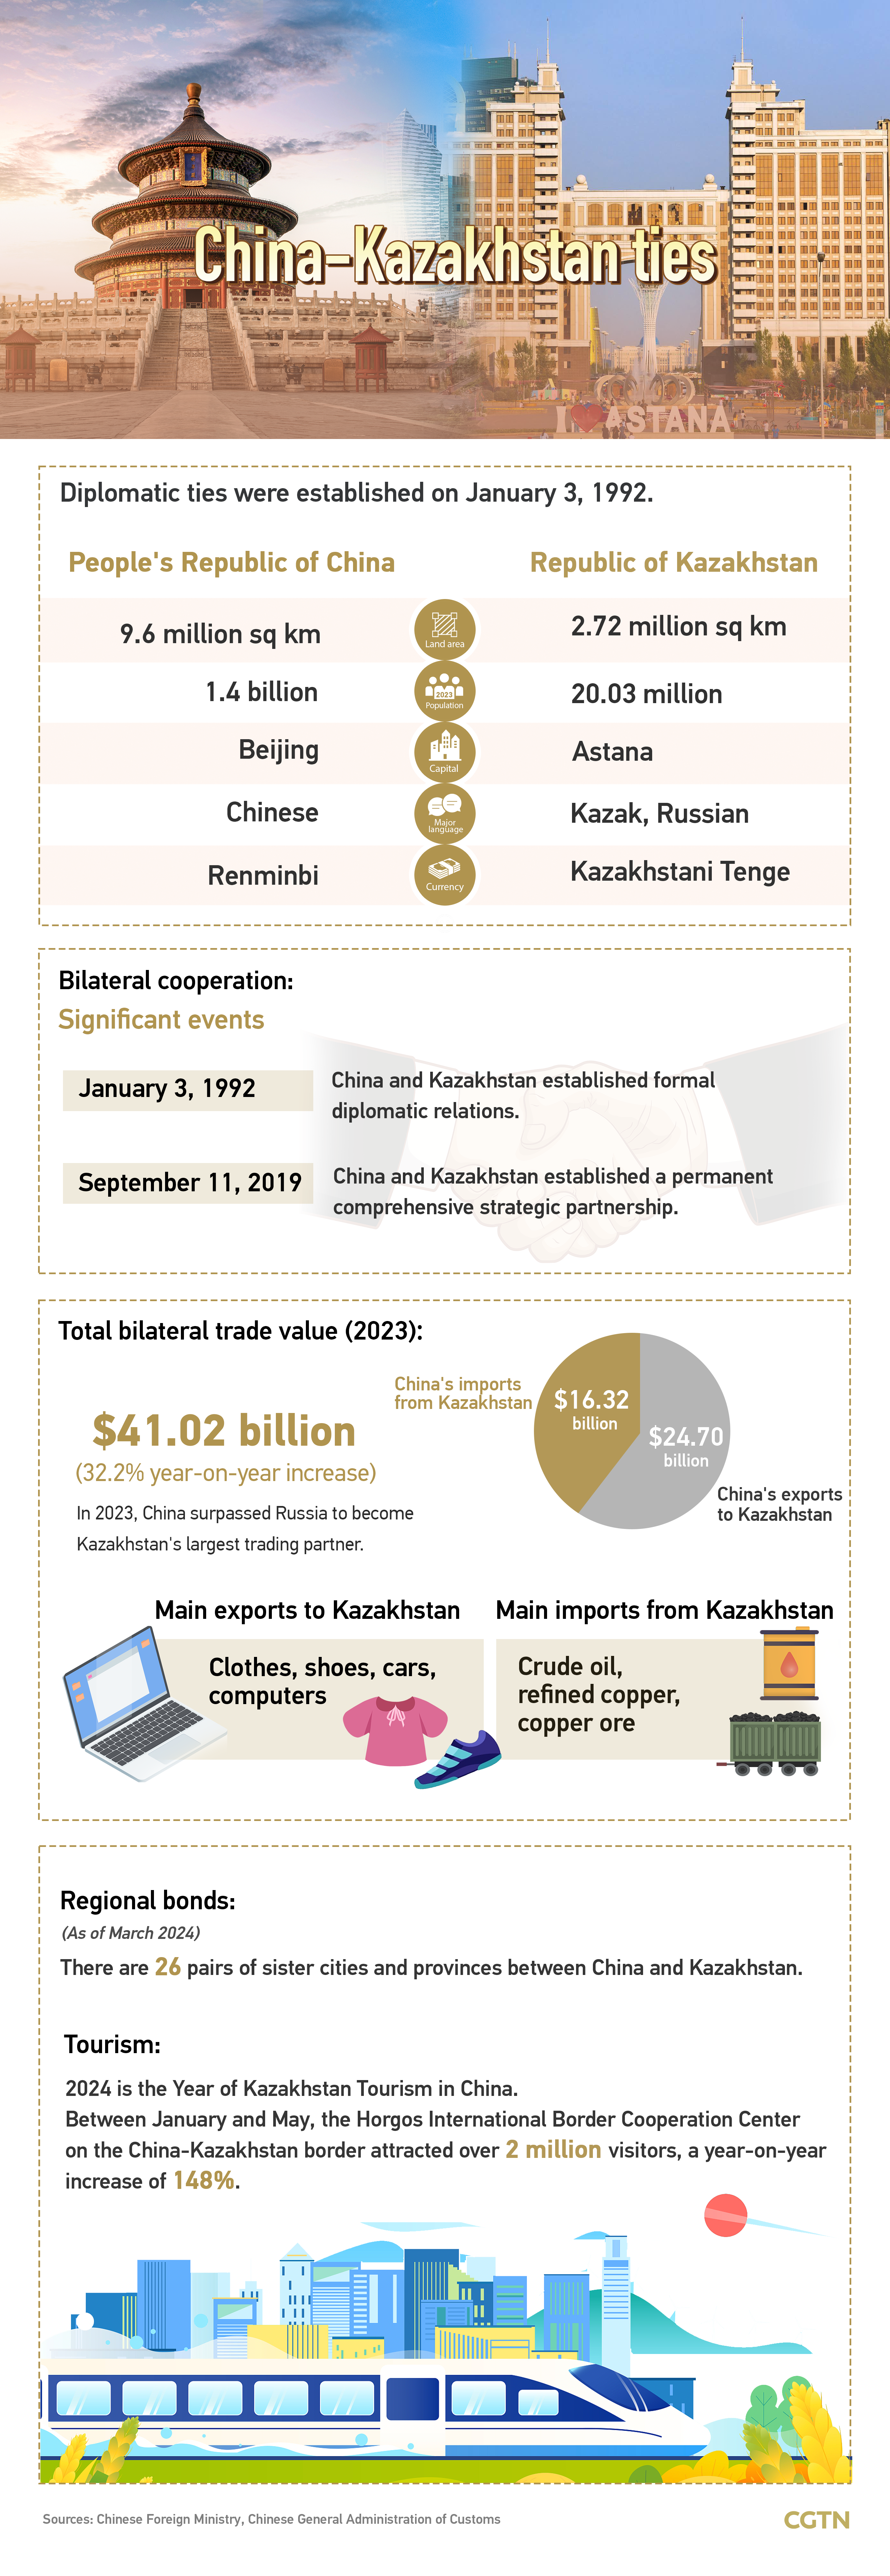 Graphics: China-Kazakhstan cooperation full of opportunities